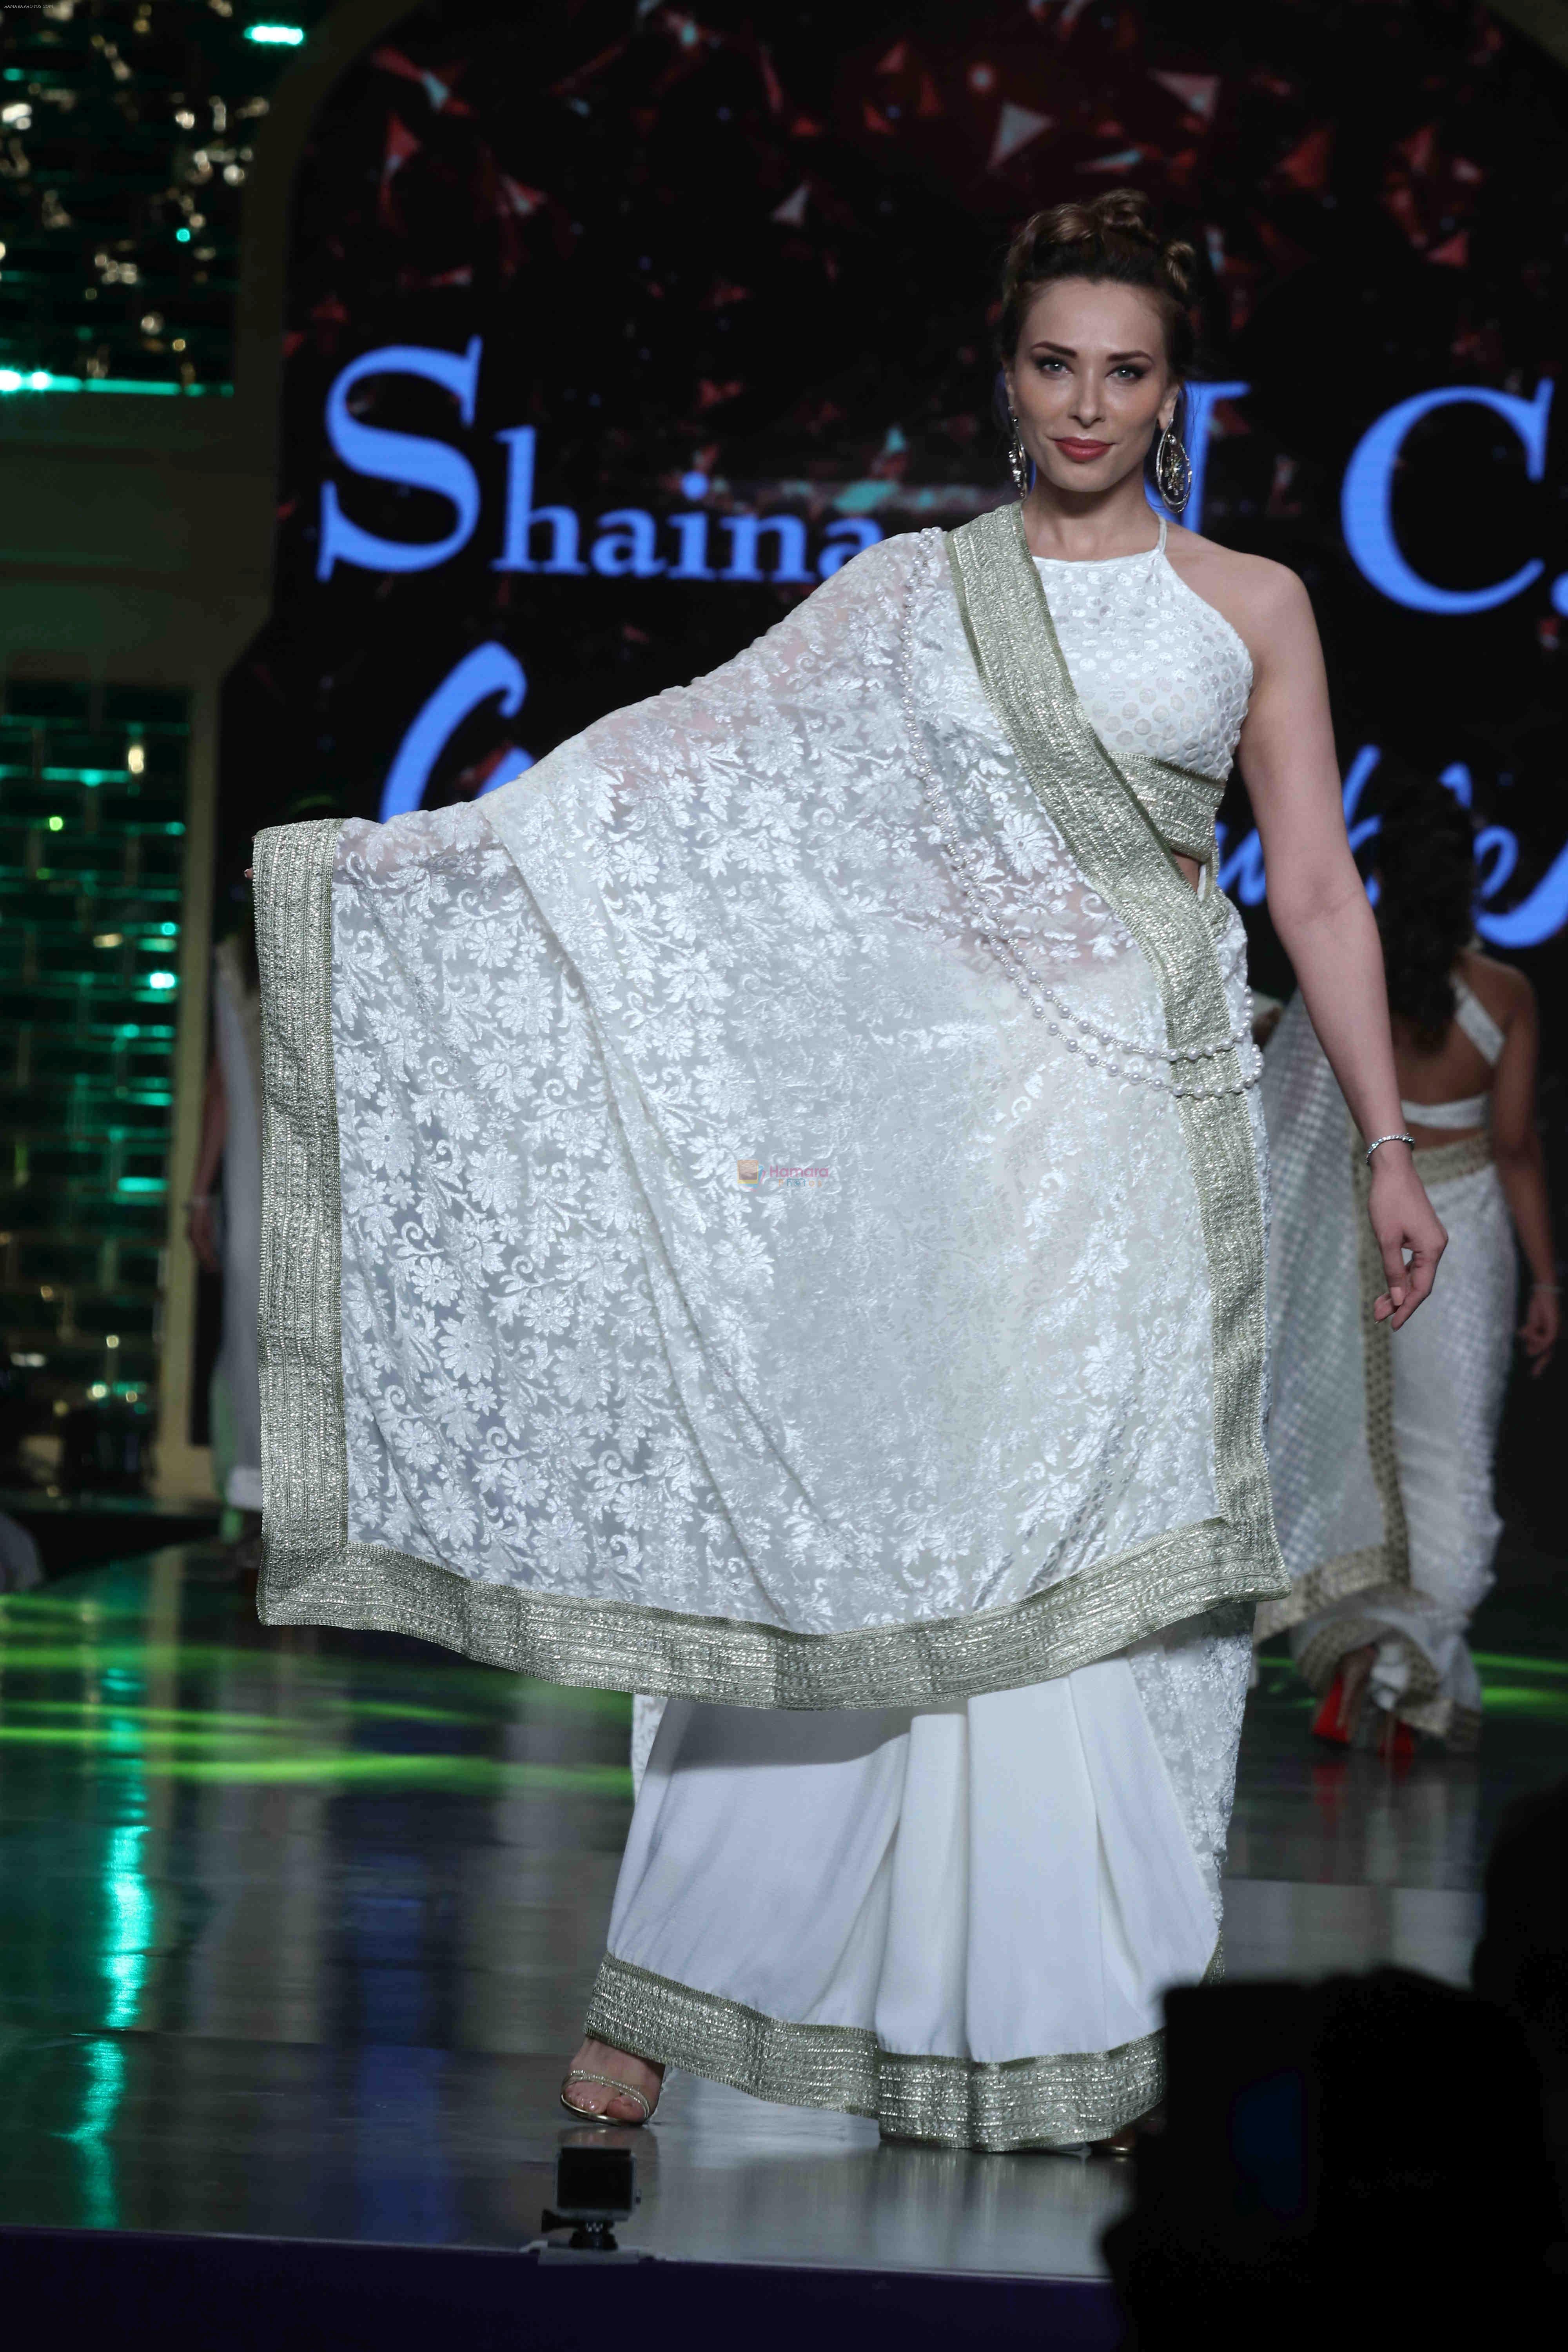 Lulia Vantur walk the ramp at 12th Annual Caring with Style fashion show